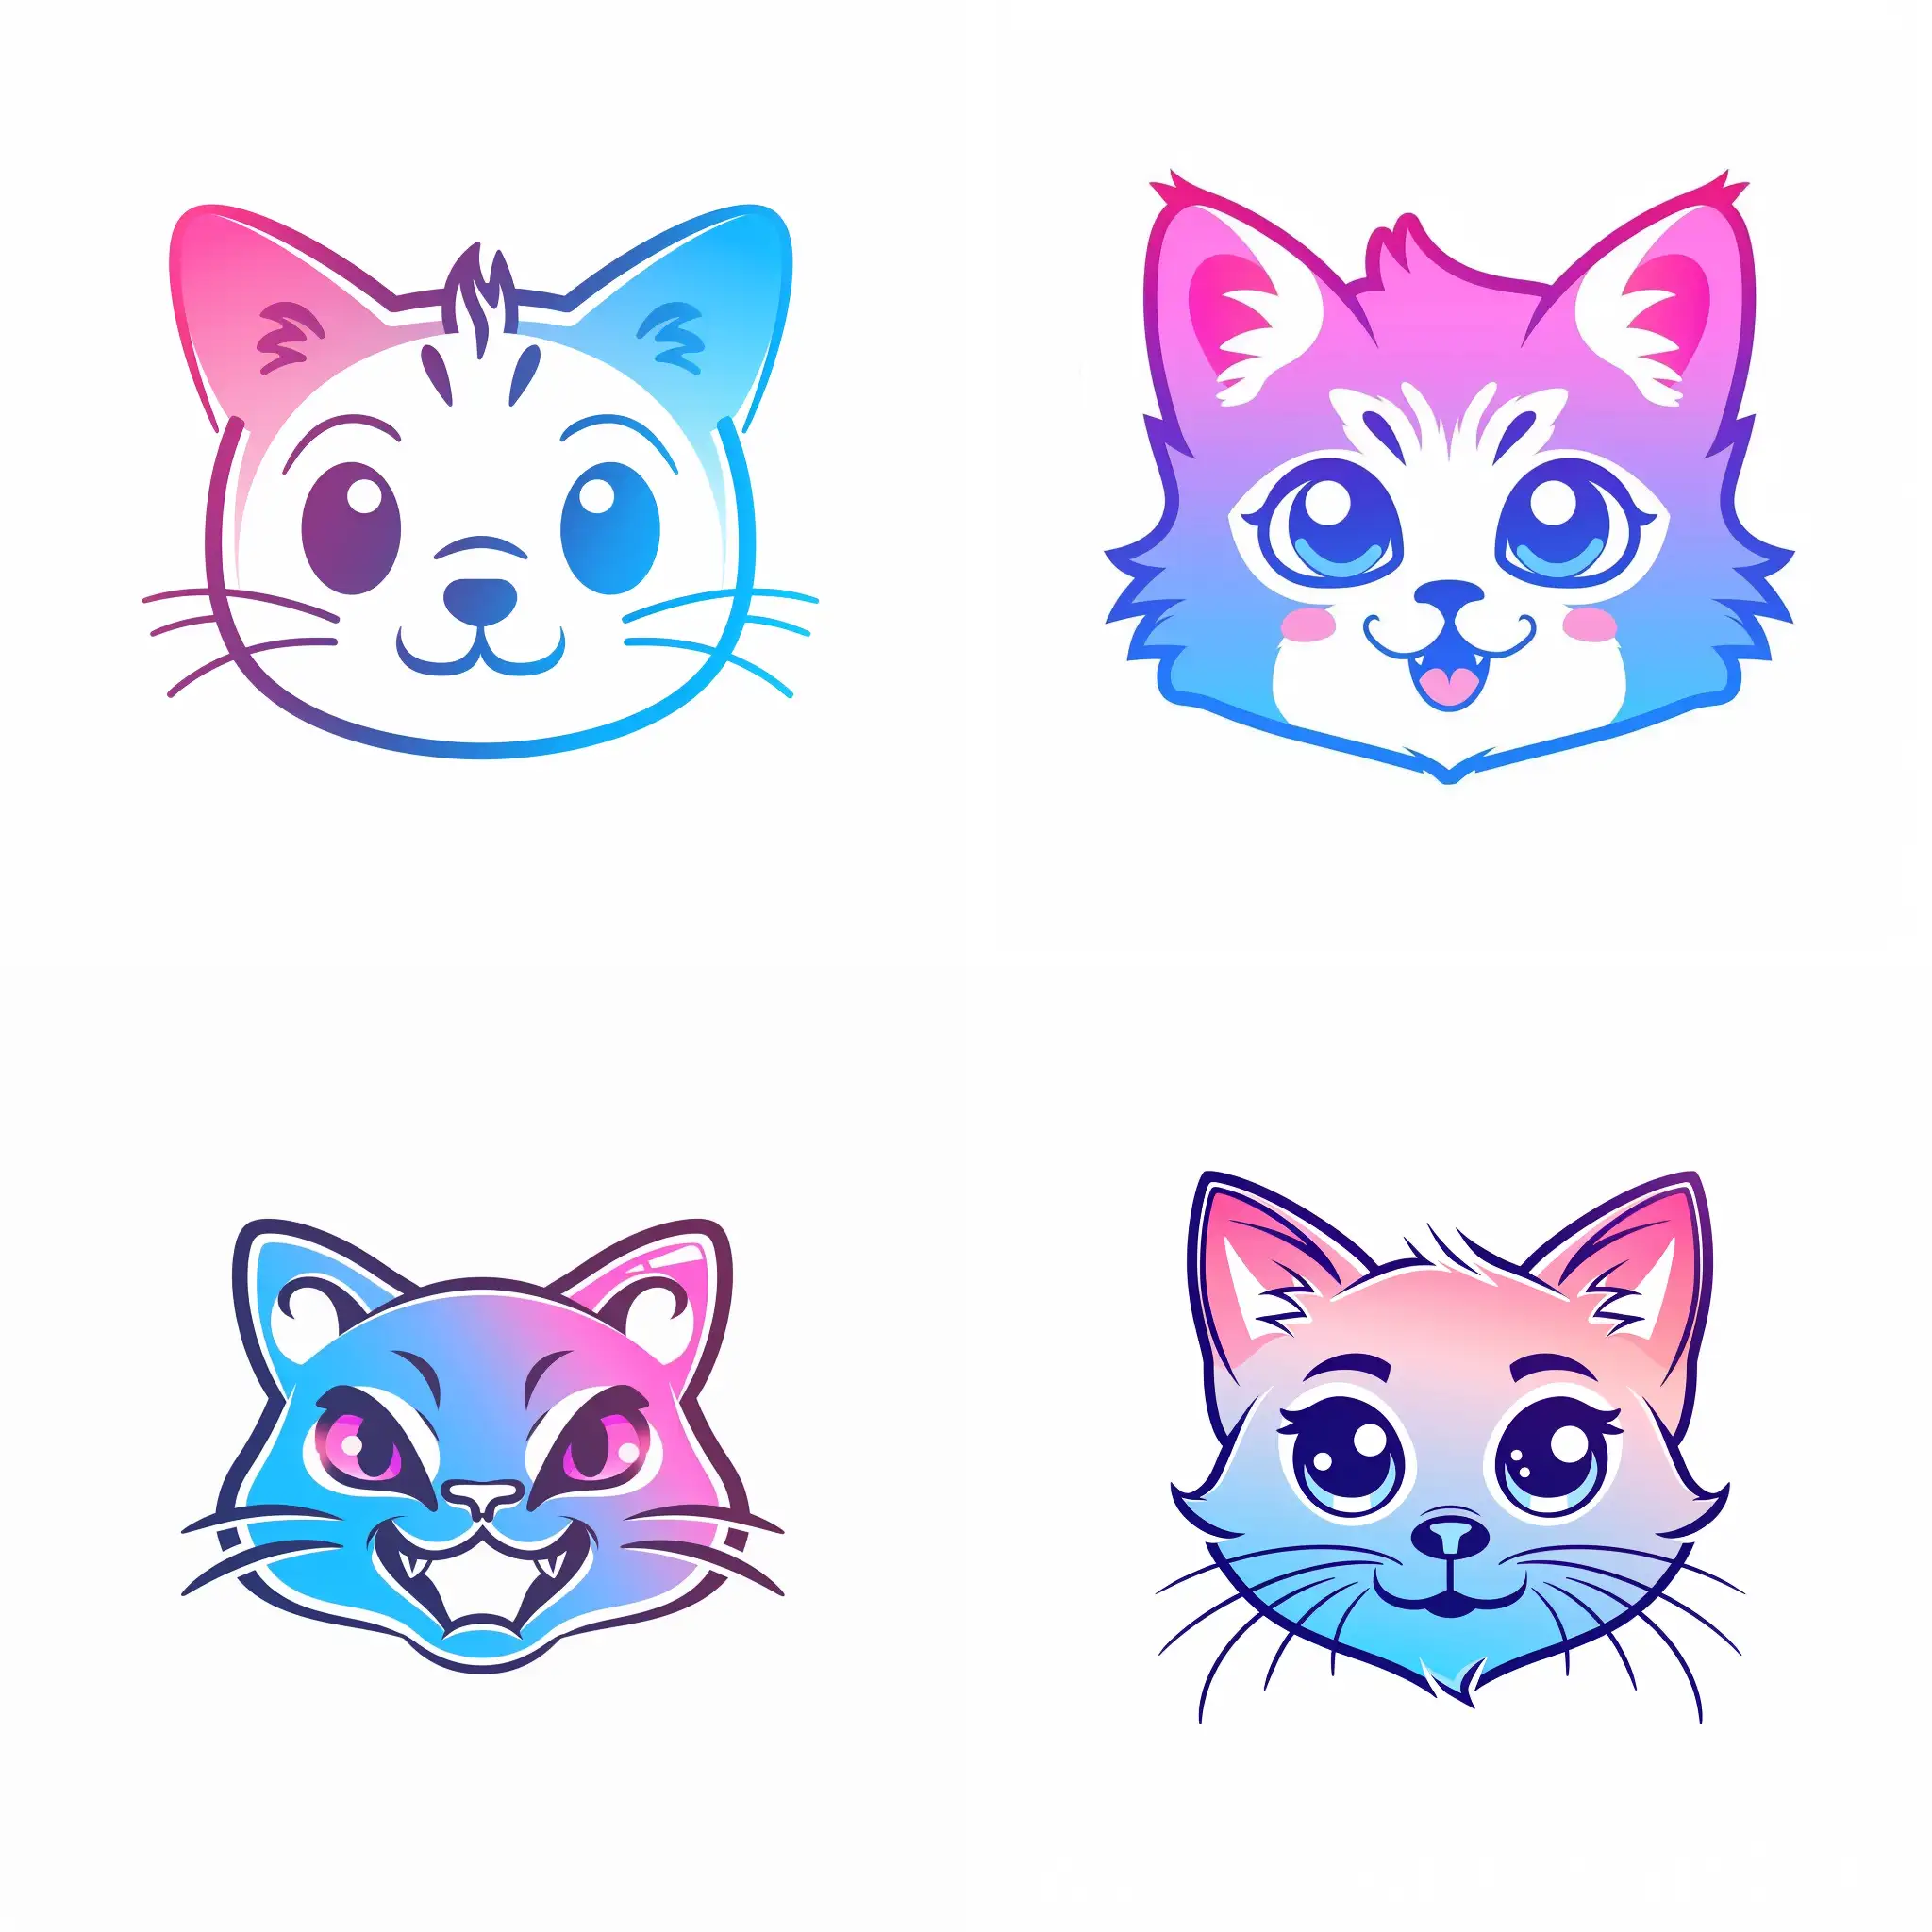 Funny-and-Crazy-Kitten-Logo-Playful-Cartoon-Design-in-Blue-to-Pink-Gradient